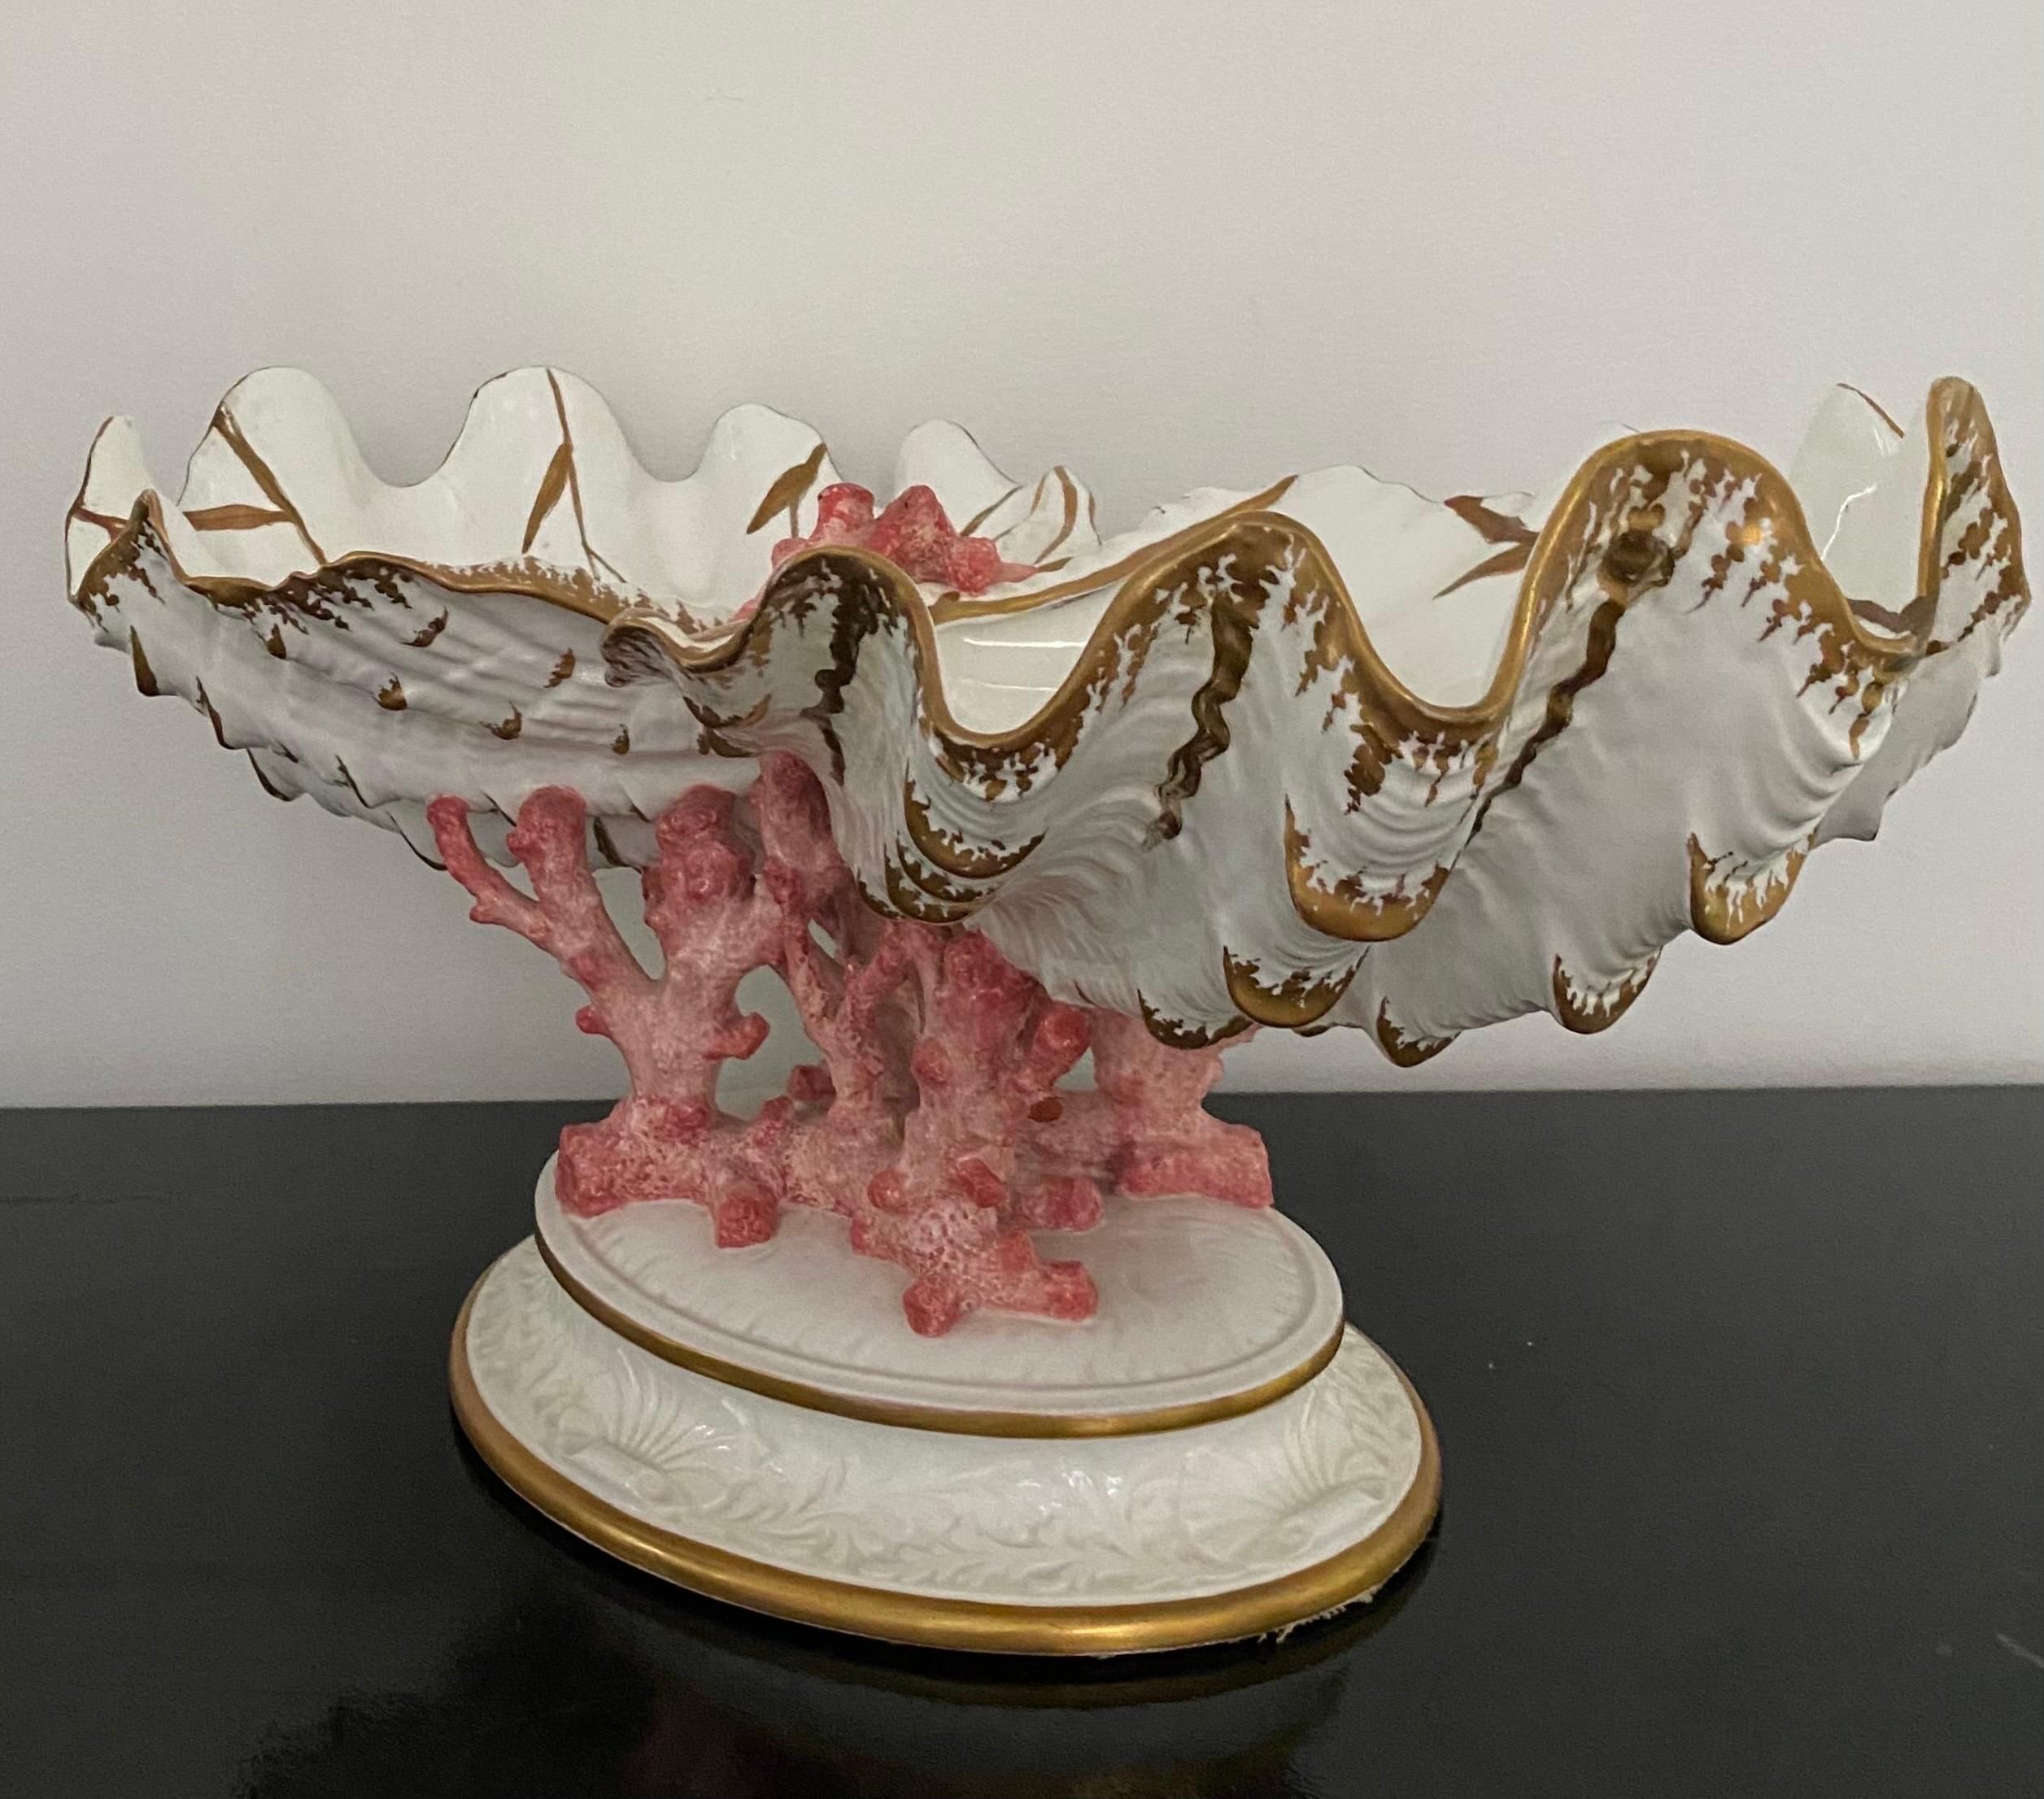 English Rare Wedgwood Coral and Clamshells Decorative Pedestal Table Centerpiece Dish